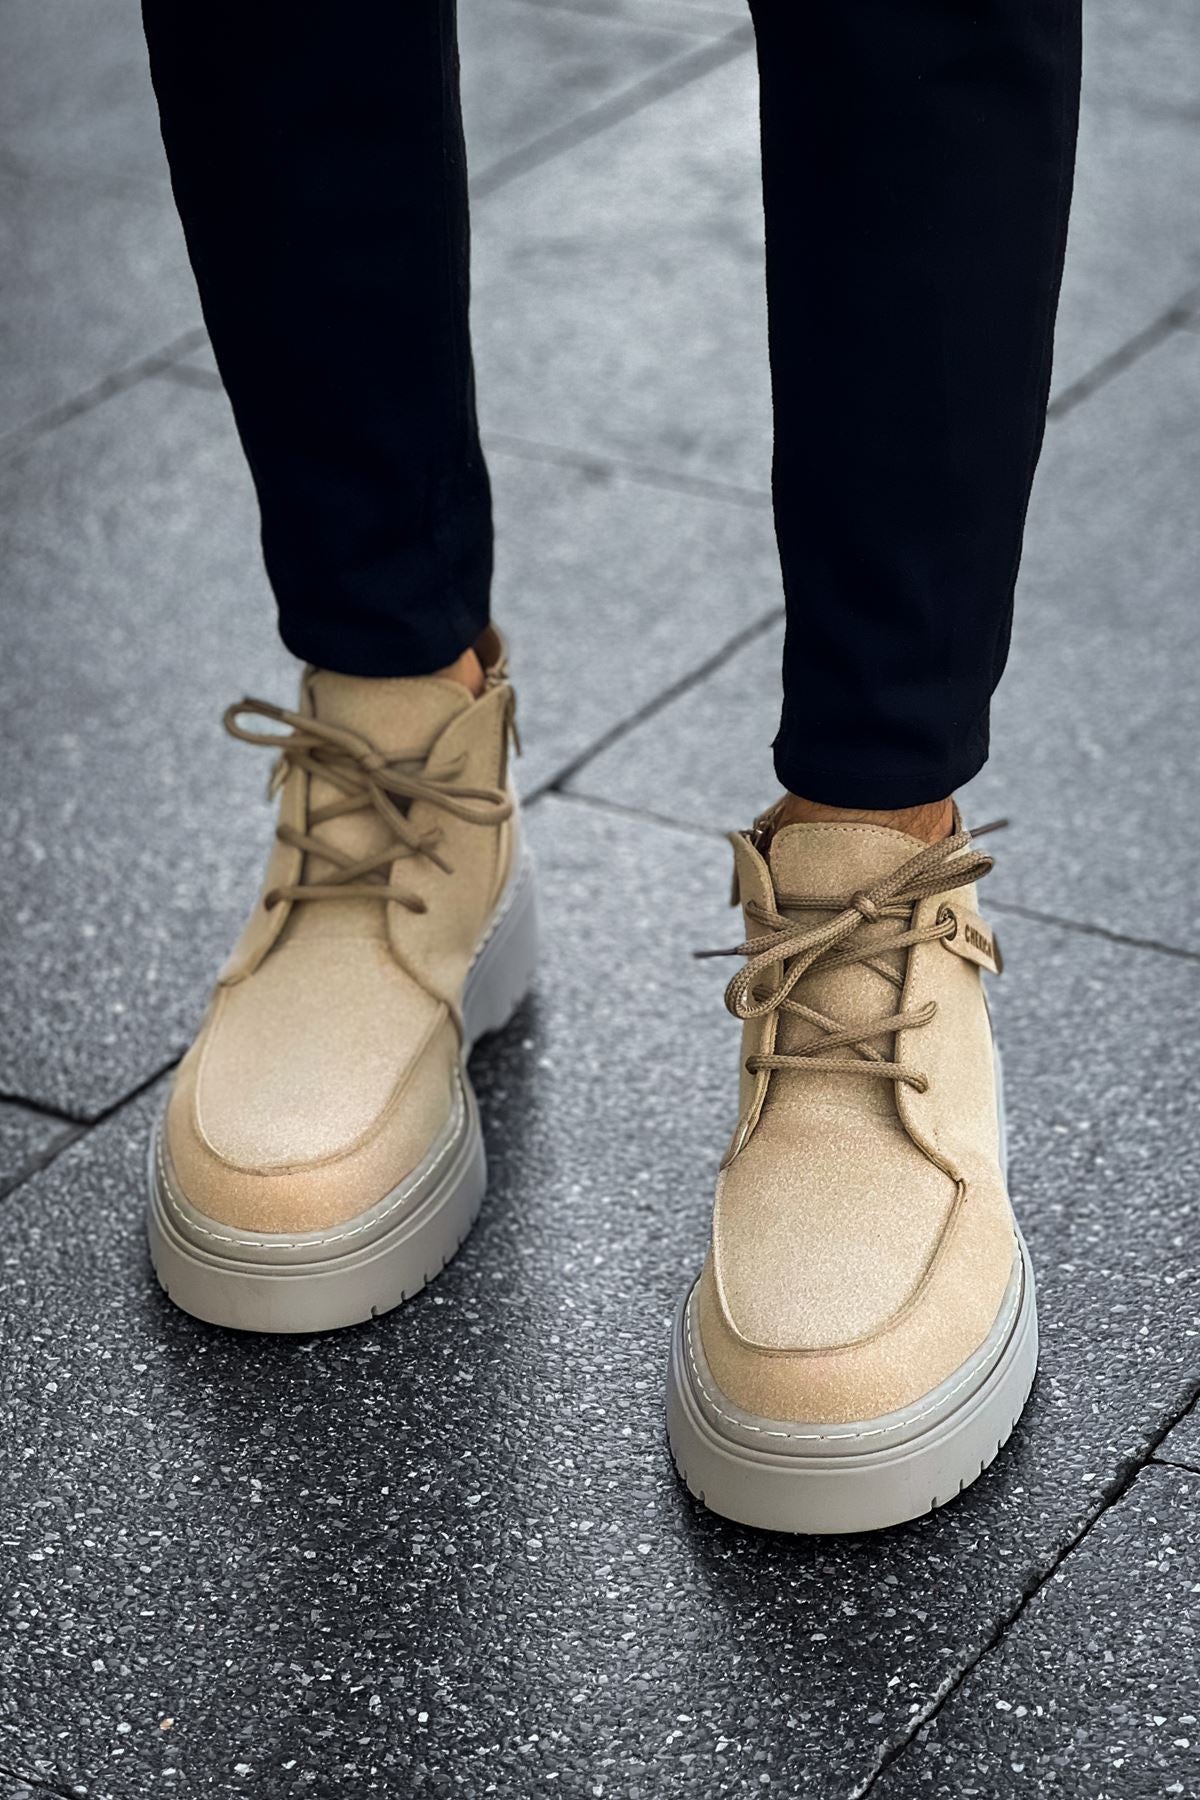 CH213 Men's Boots SAND Suede - STREETMODE ™